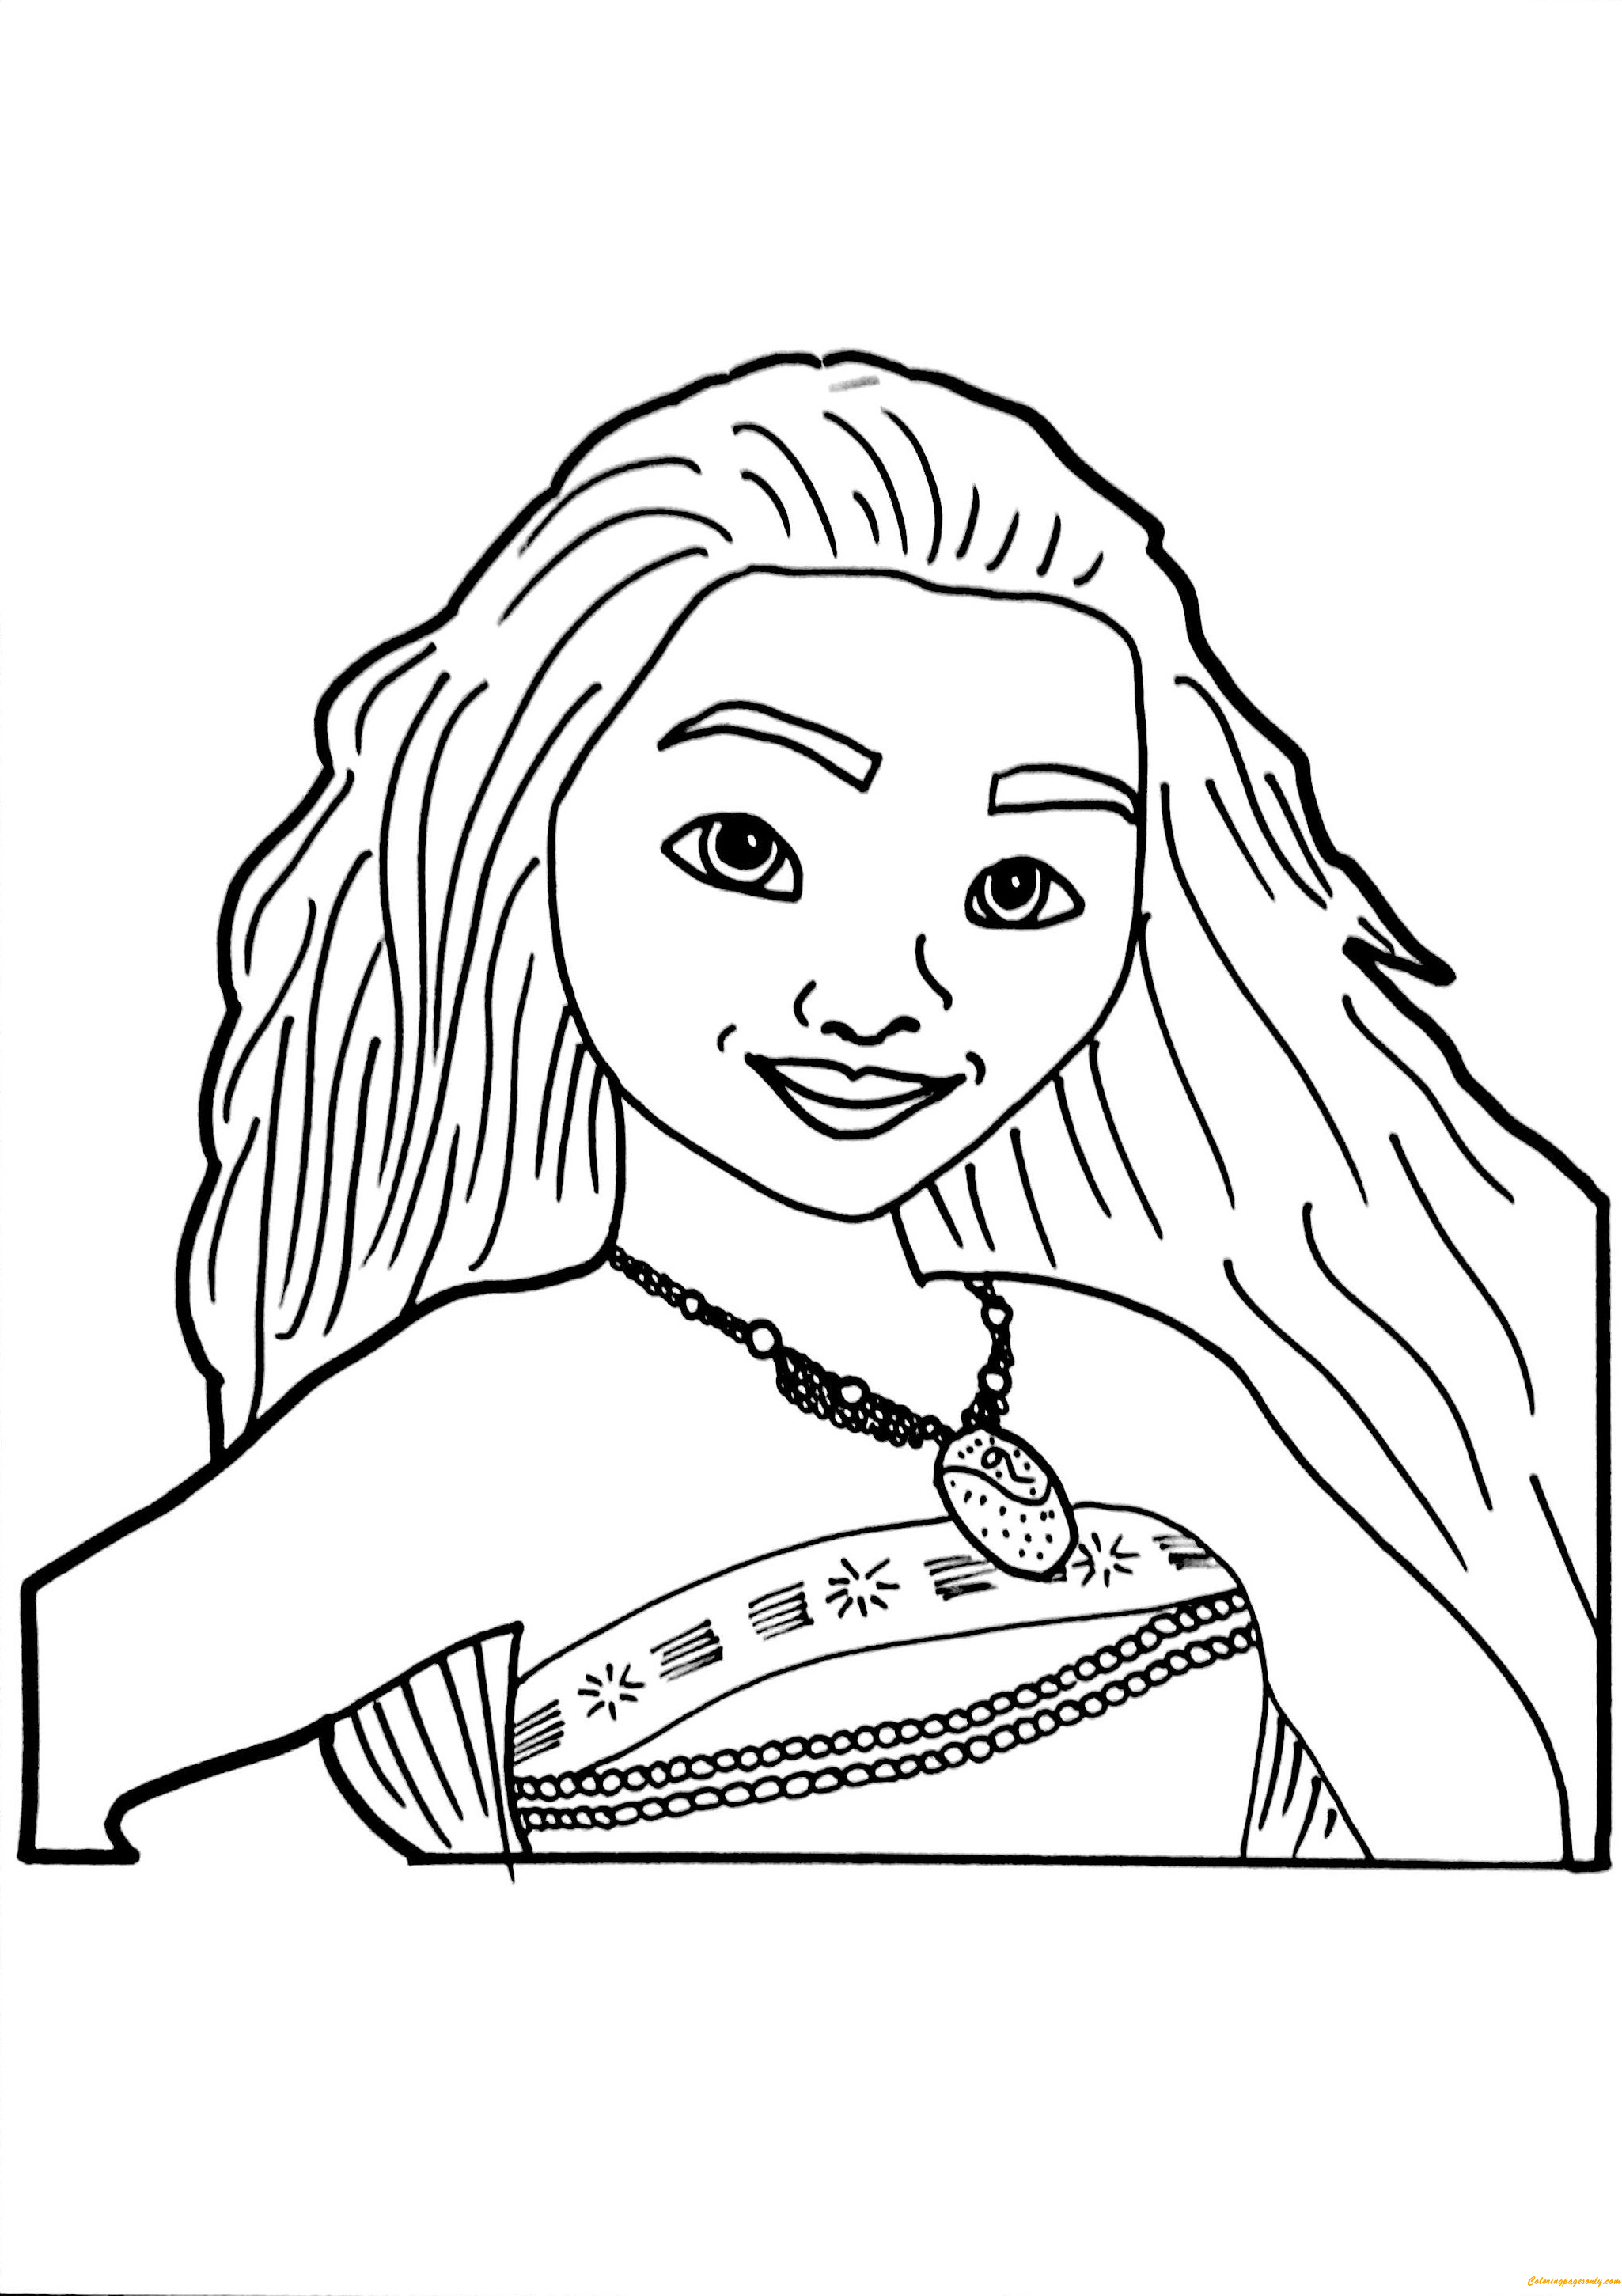 Disney Moana Coloring Pages - Cartoons Coloring Pages ...